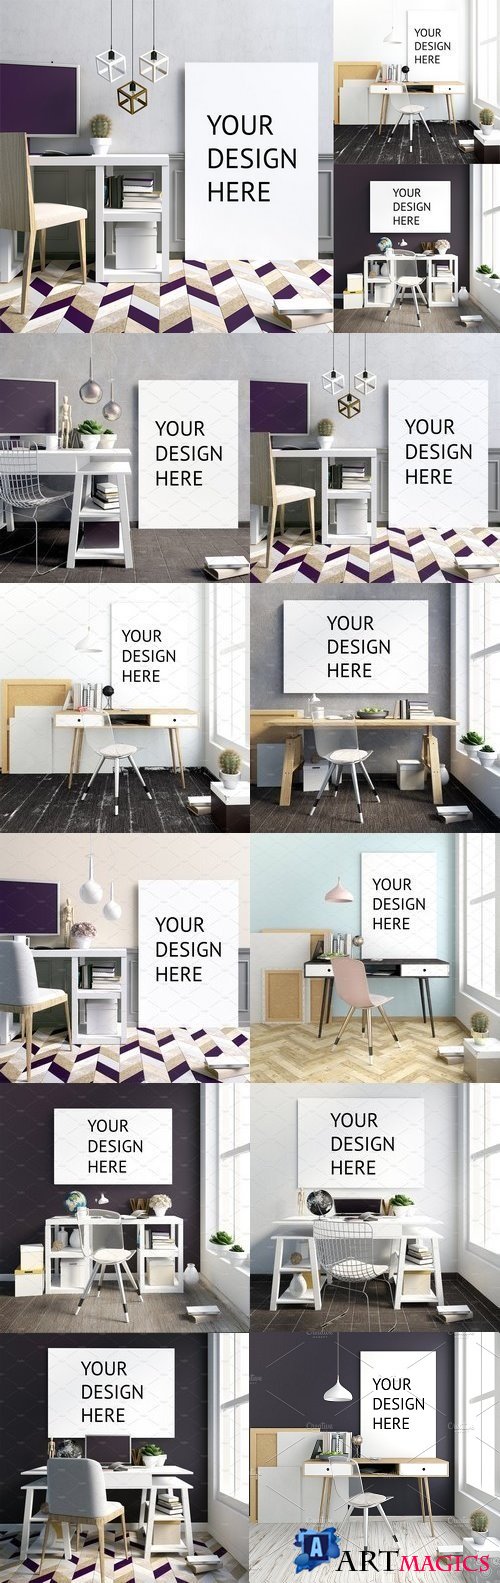 10 workplace poster mock up - 1798951